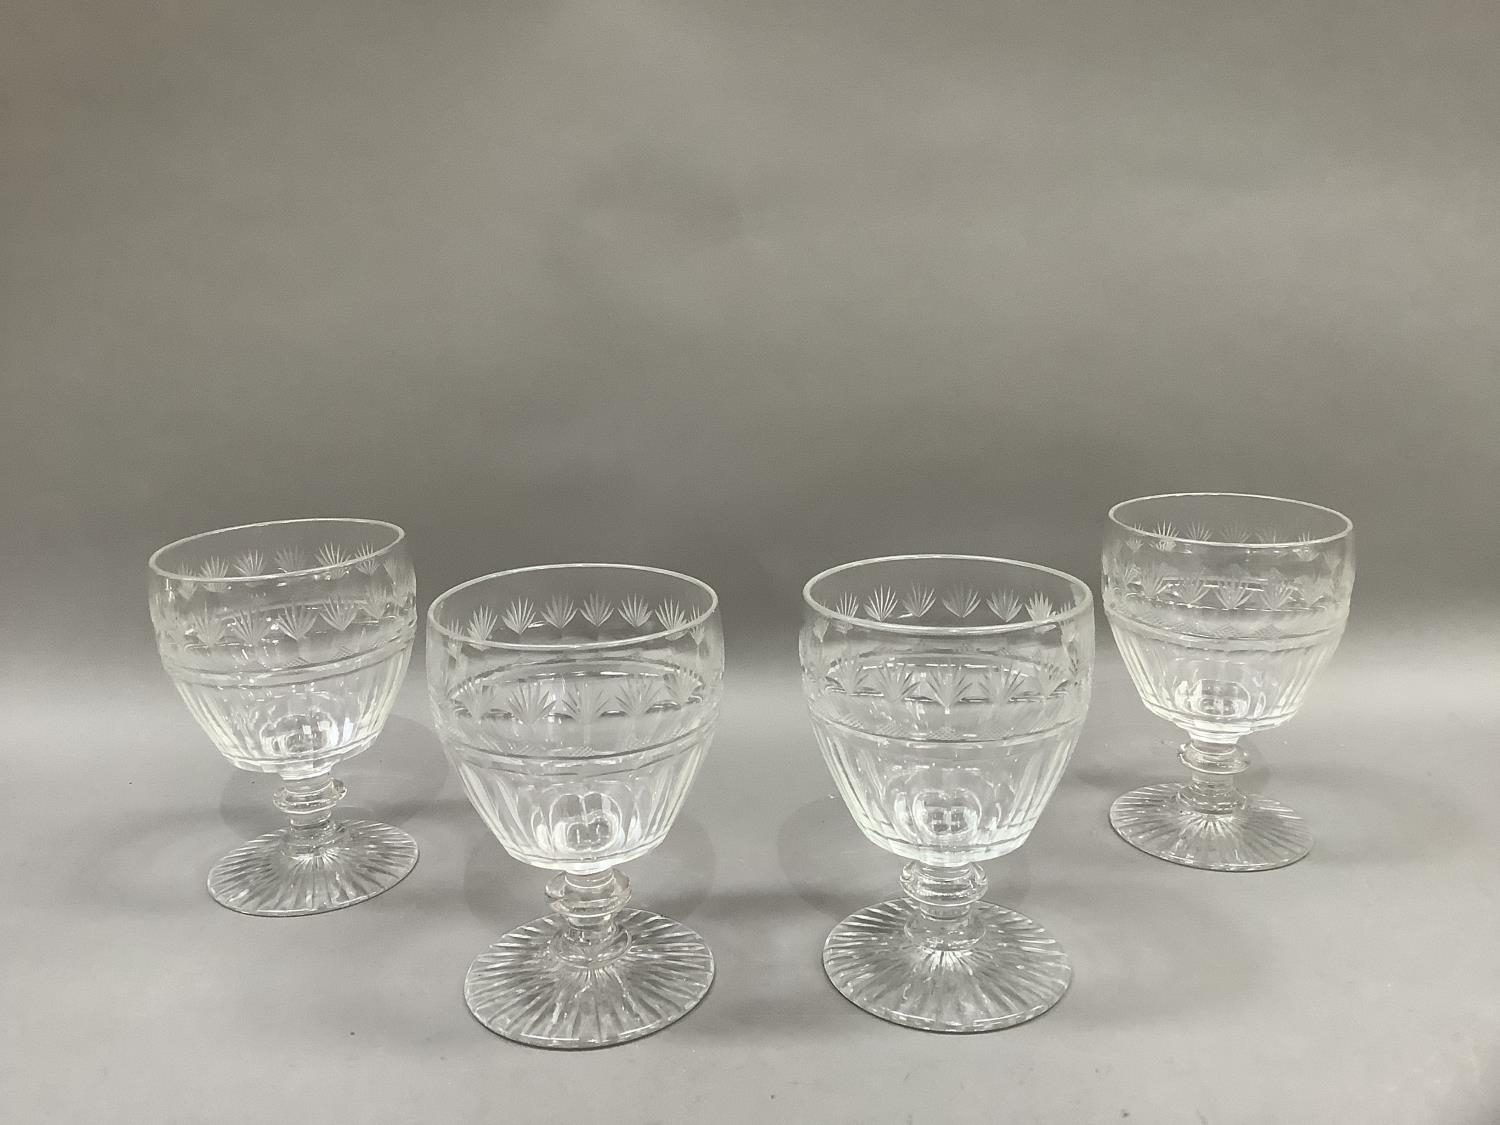 A set of four 19th century wine goblets, the panel cut bodies having a border, fan cut and octagonal - Image 2 of 2